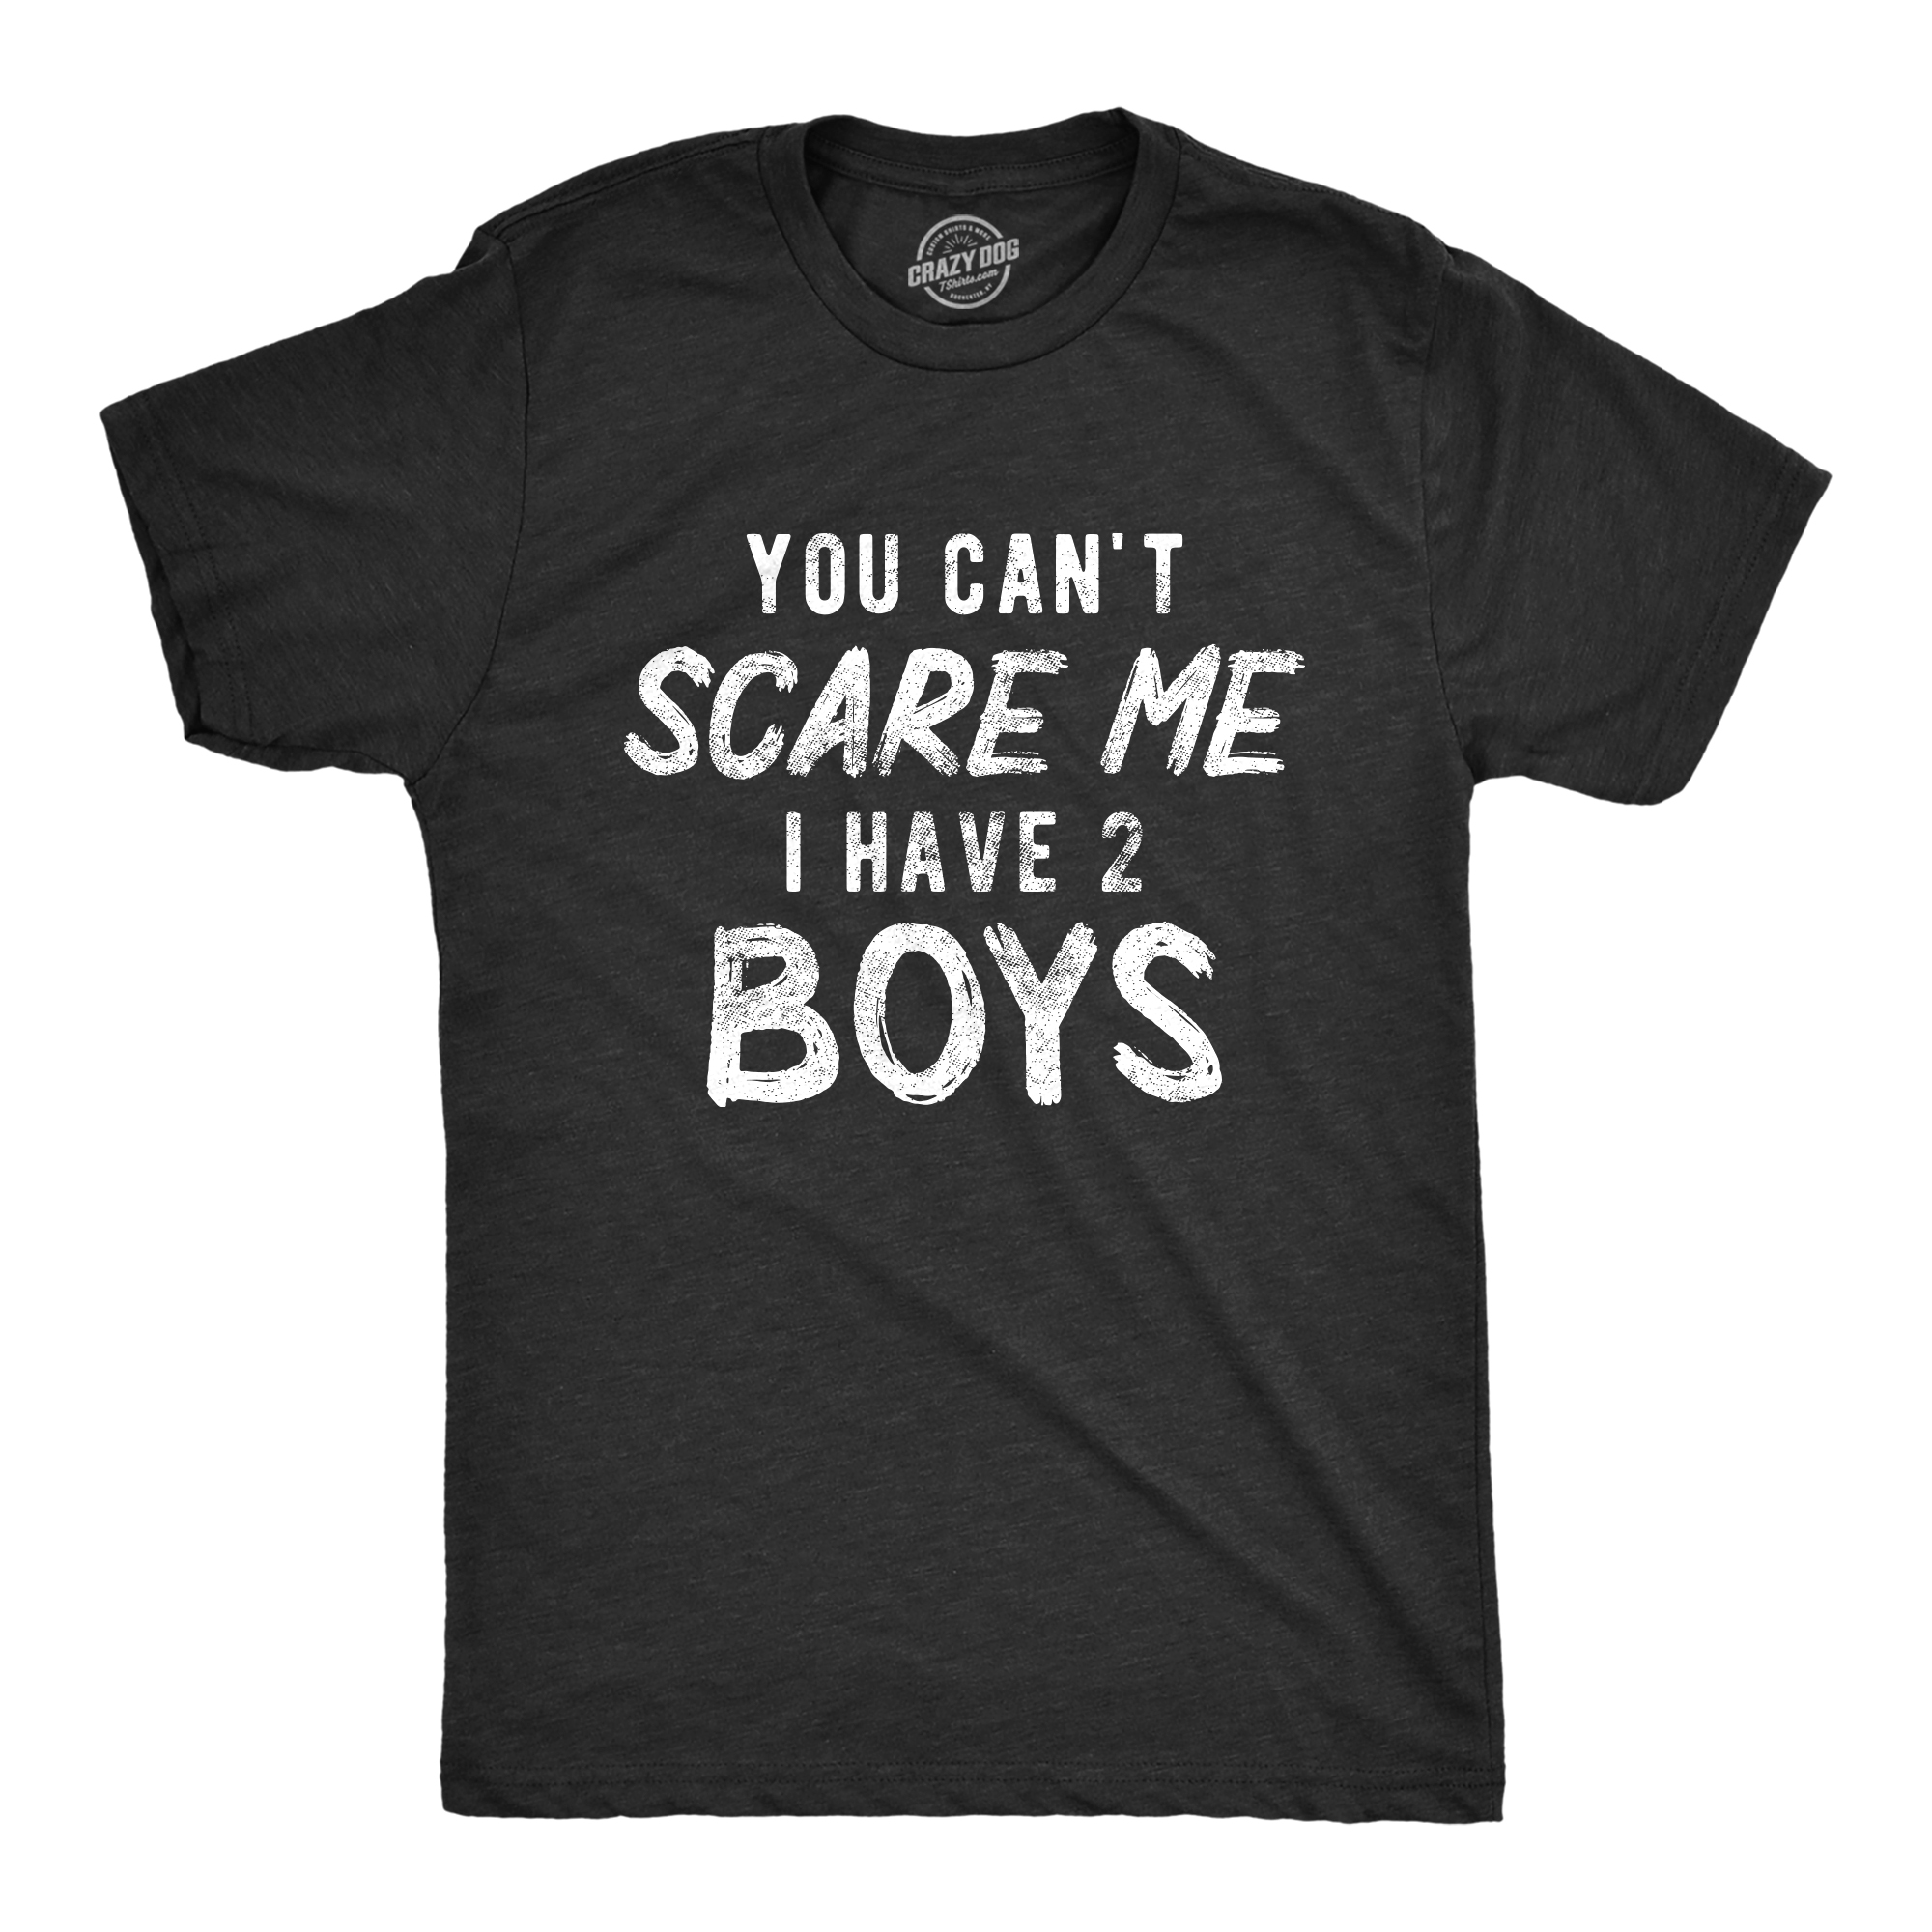 Crazy Dog Tshirts Mens You Can't Scare Me I Have Two Boys Tshirt Funny Parenting Fathers Day Tee